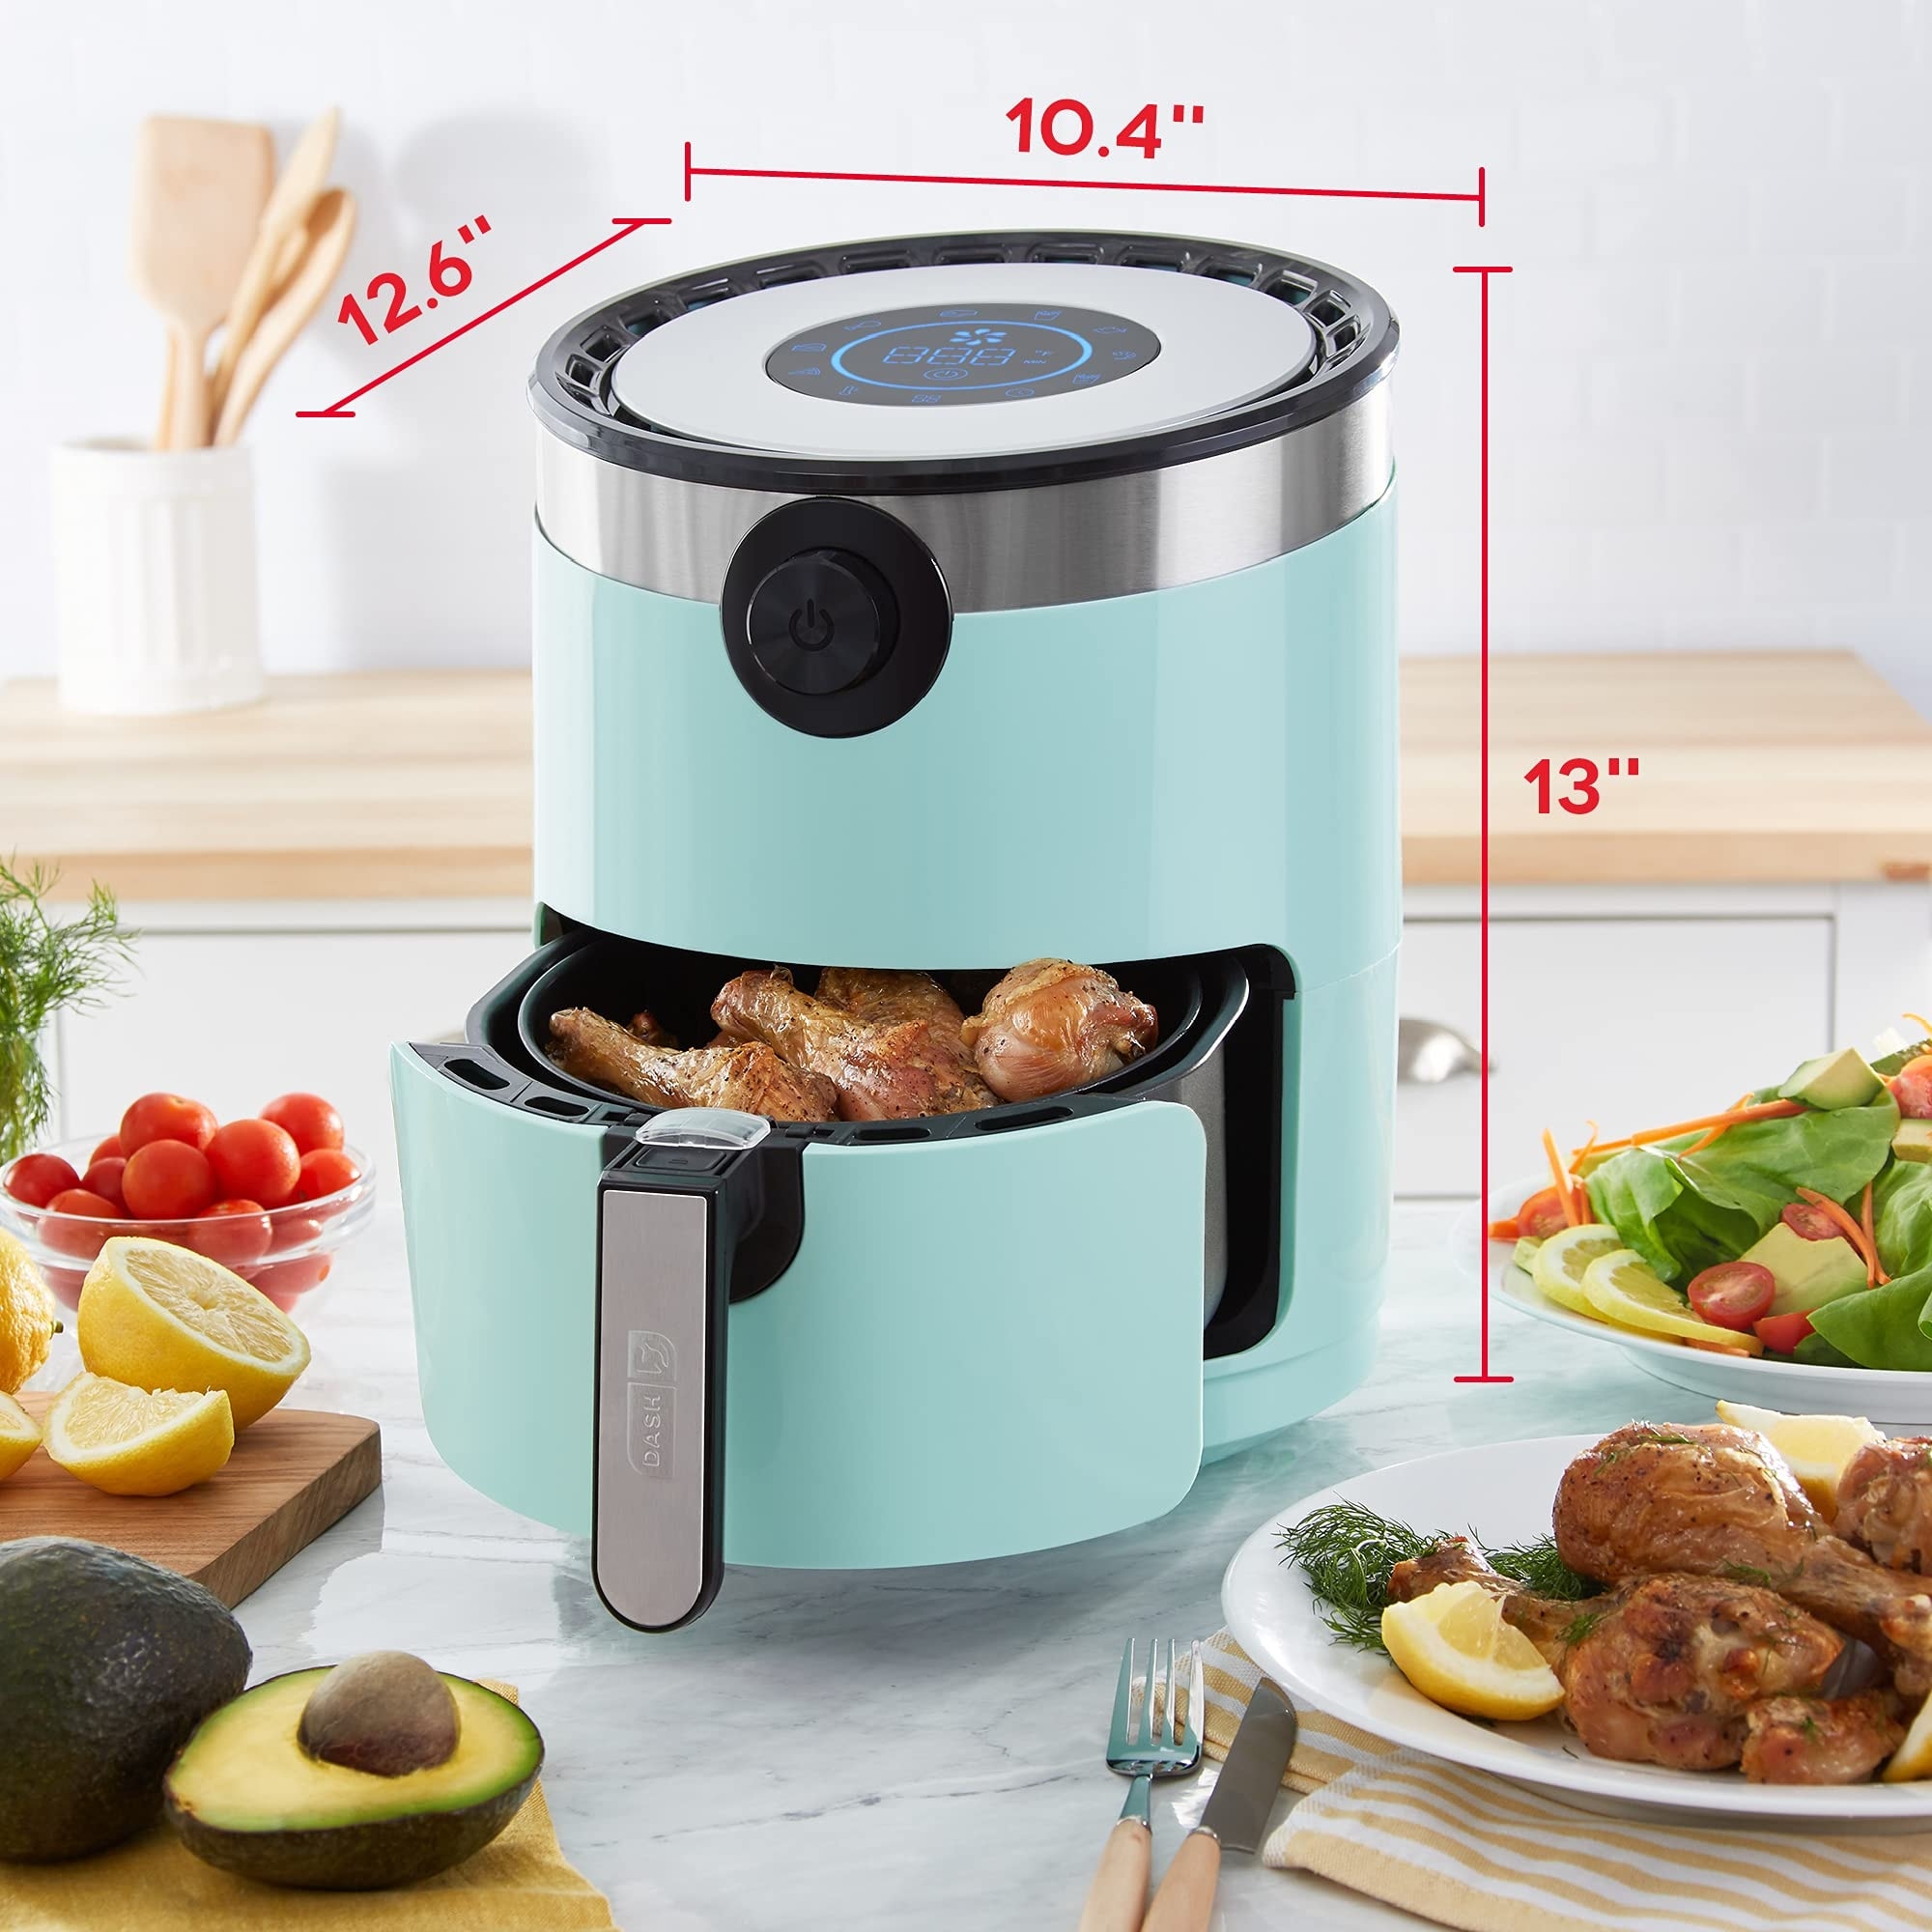 https://ak1.ostkcdn.com/images/products/is/images/direct/c03bd690493a8f51374ce16c892d7a8959c32603/Air-Fryer-%2B-Oven-Cooker-with-Digital-Display-%2B-8-Presets%2C-Temperature%2C-Mini-Rice-Cooker-Steamer-with-Nonstick-Pot%2C-Keep-Warm.jpg